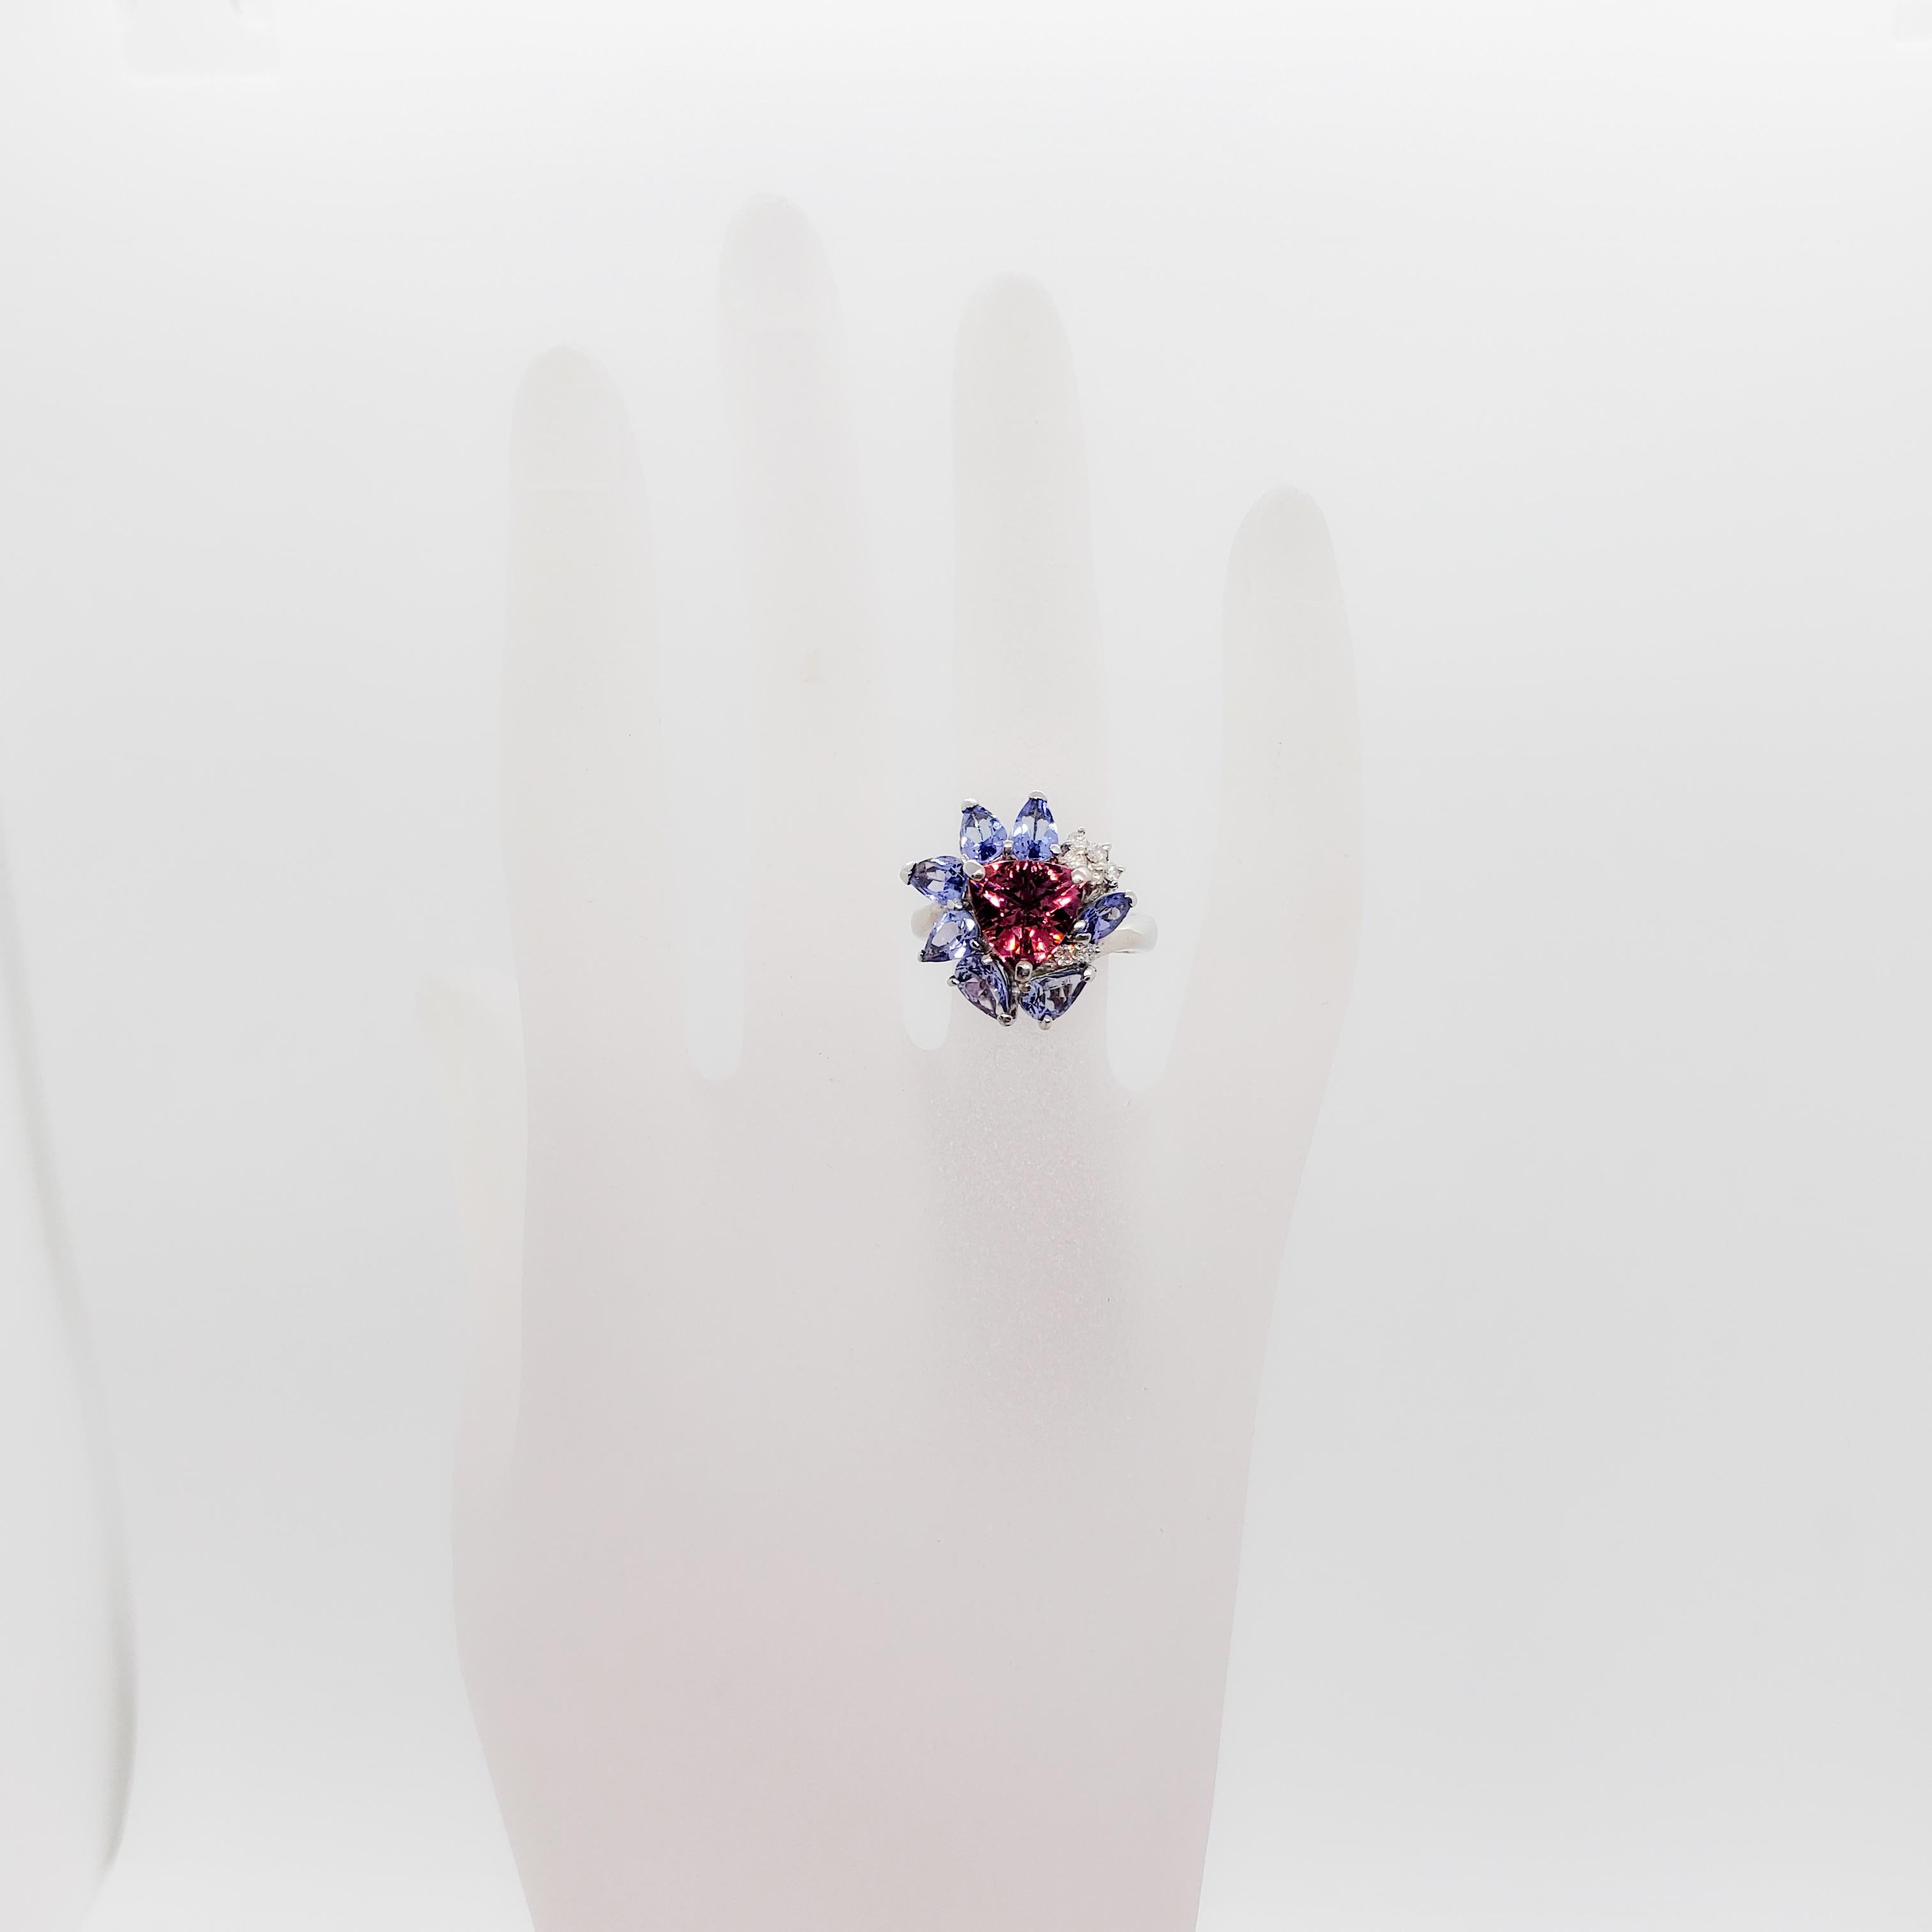 Beautiful colorful ring that showcases 2.05 ct. of pink tourmaline trillions, 2.30 ct. of tanzanite pear shapes and marquises, and 0.10 ct. of white diamond rounds.  Very unique design and combination of stones that make this ring fun and flirty. 